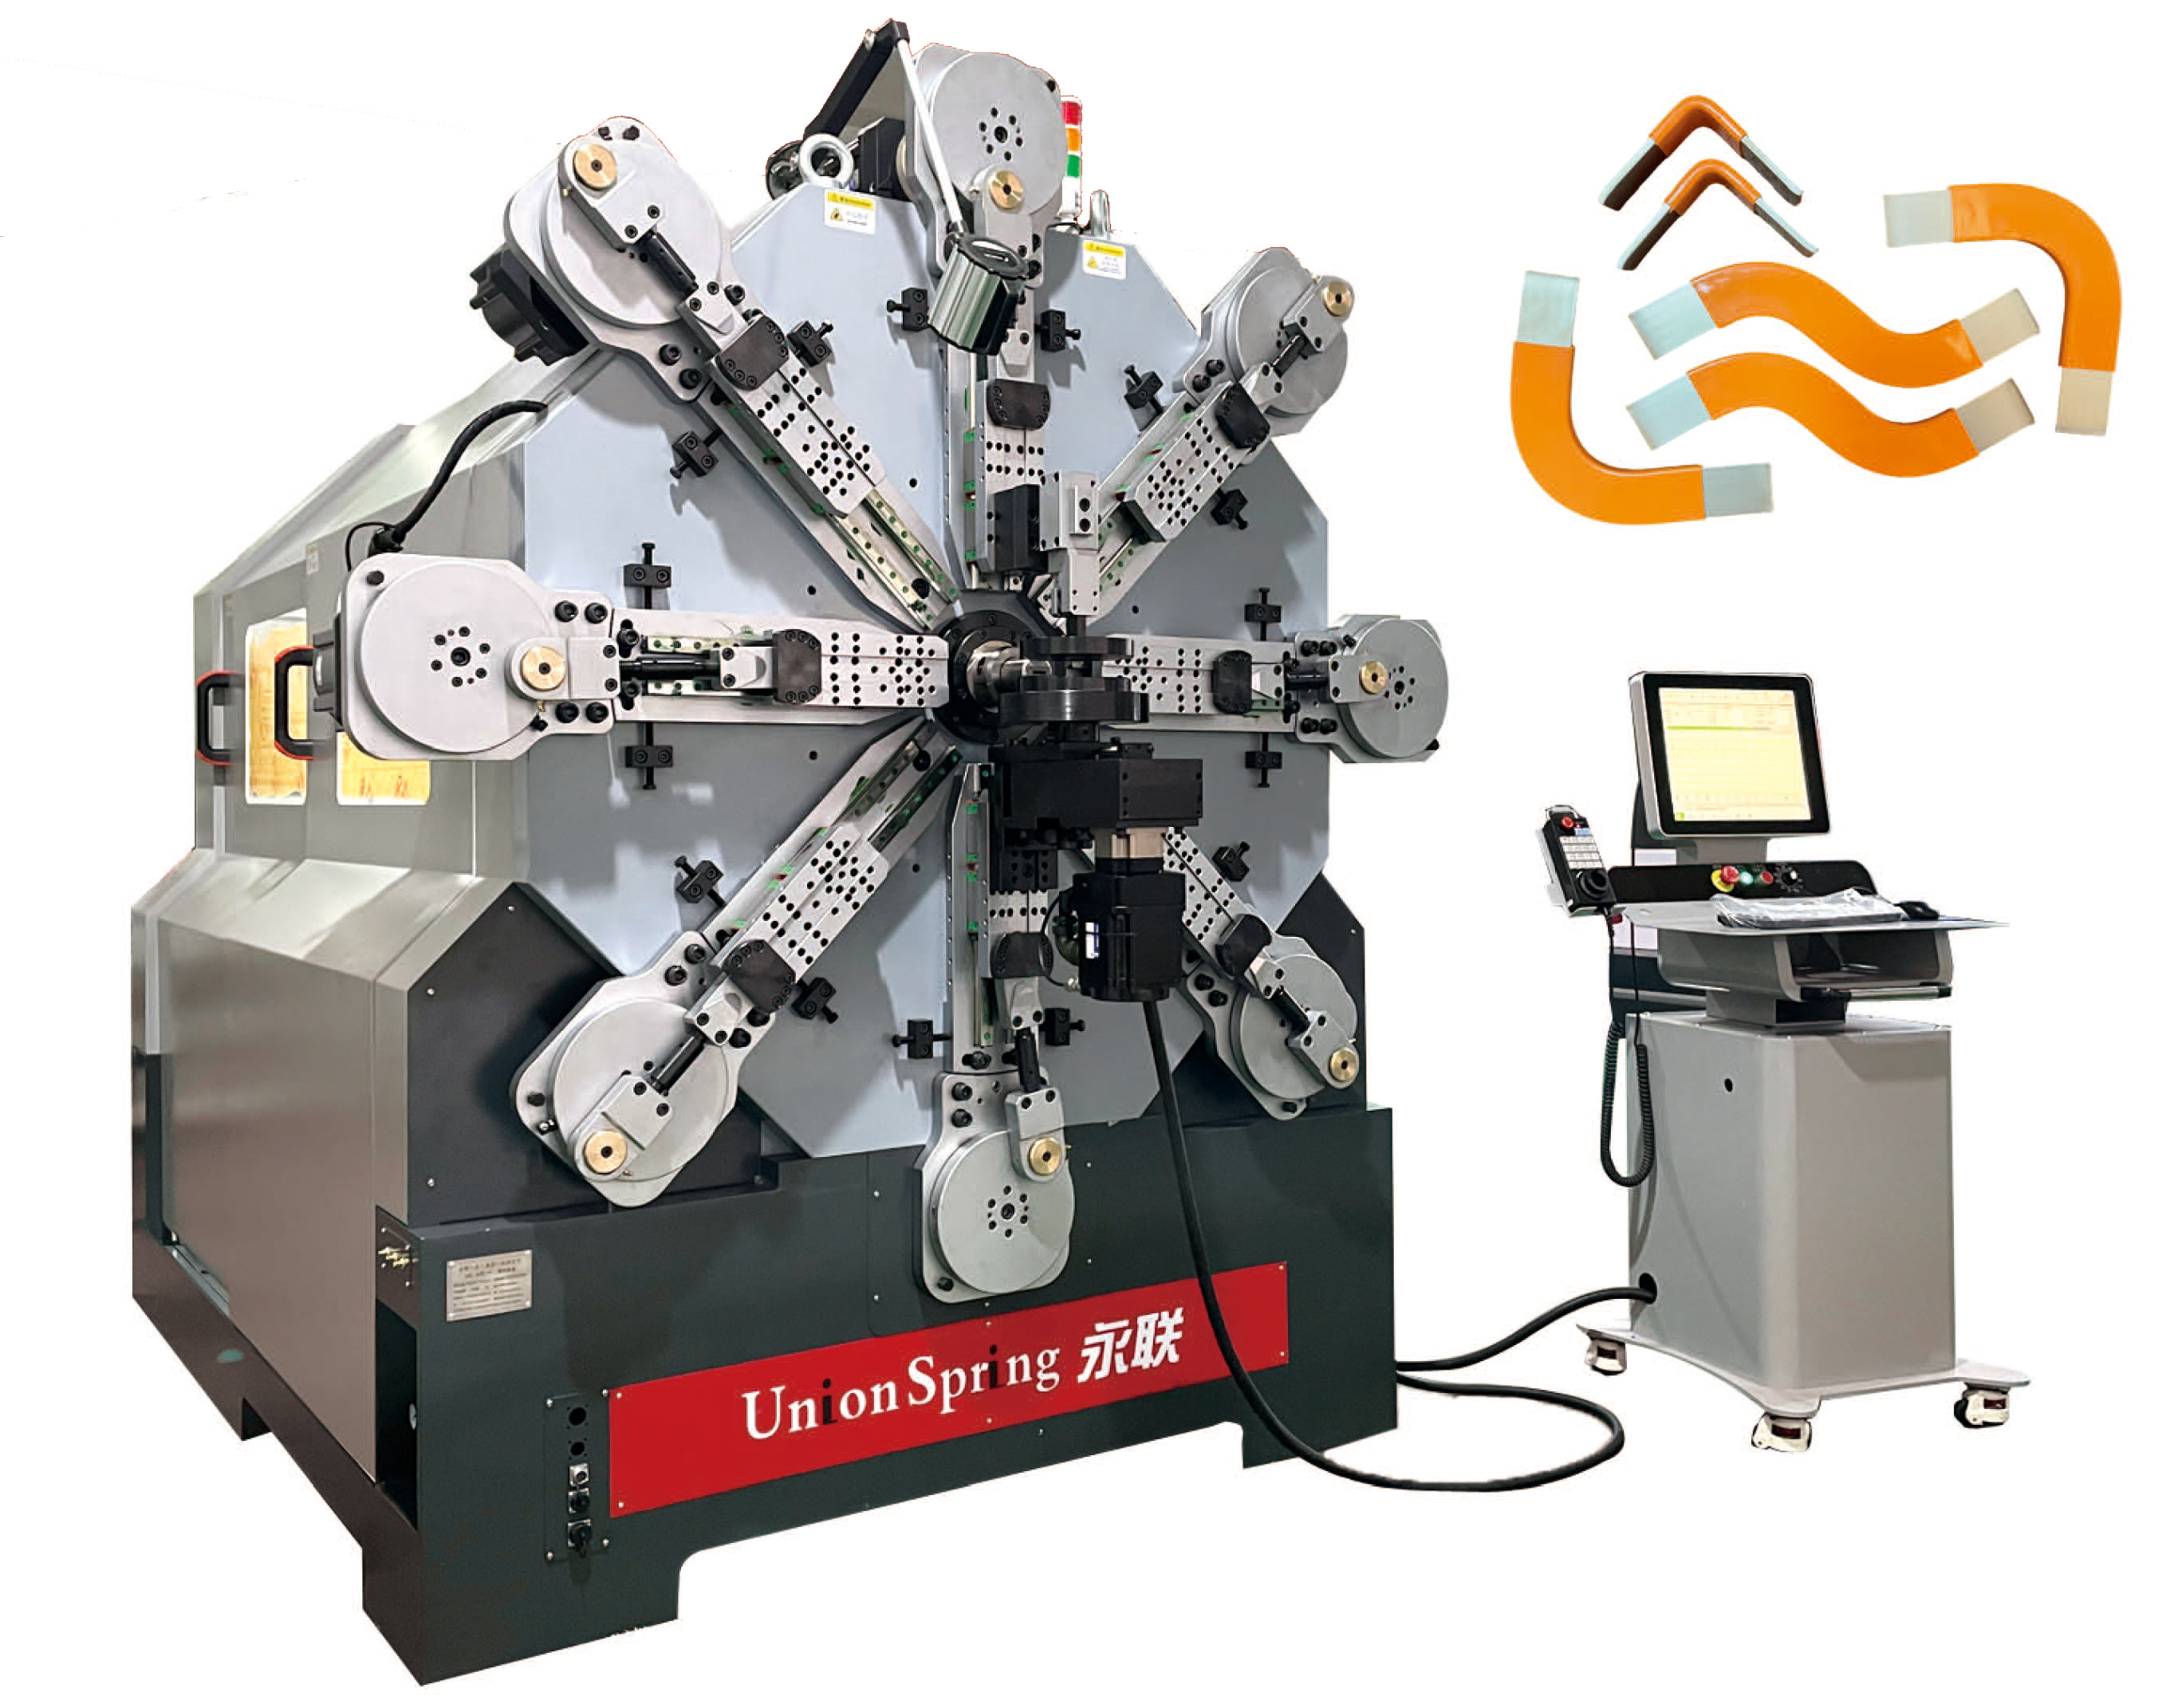 battery pack connect busbar bending machine, New energy busbar forming equipment, mate; wire bending machine